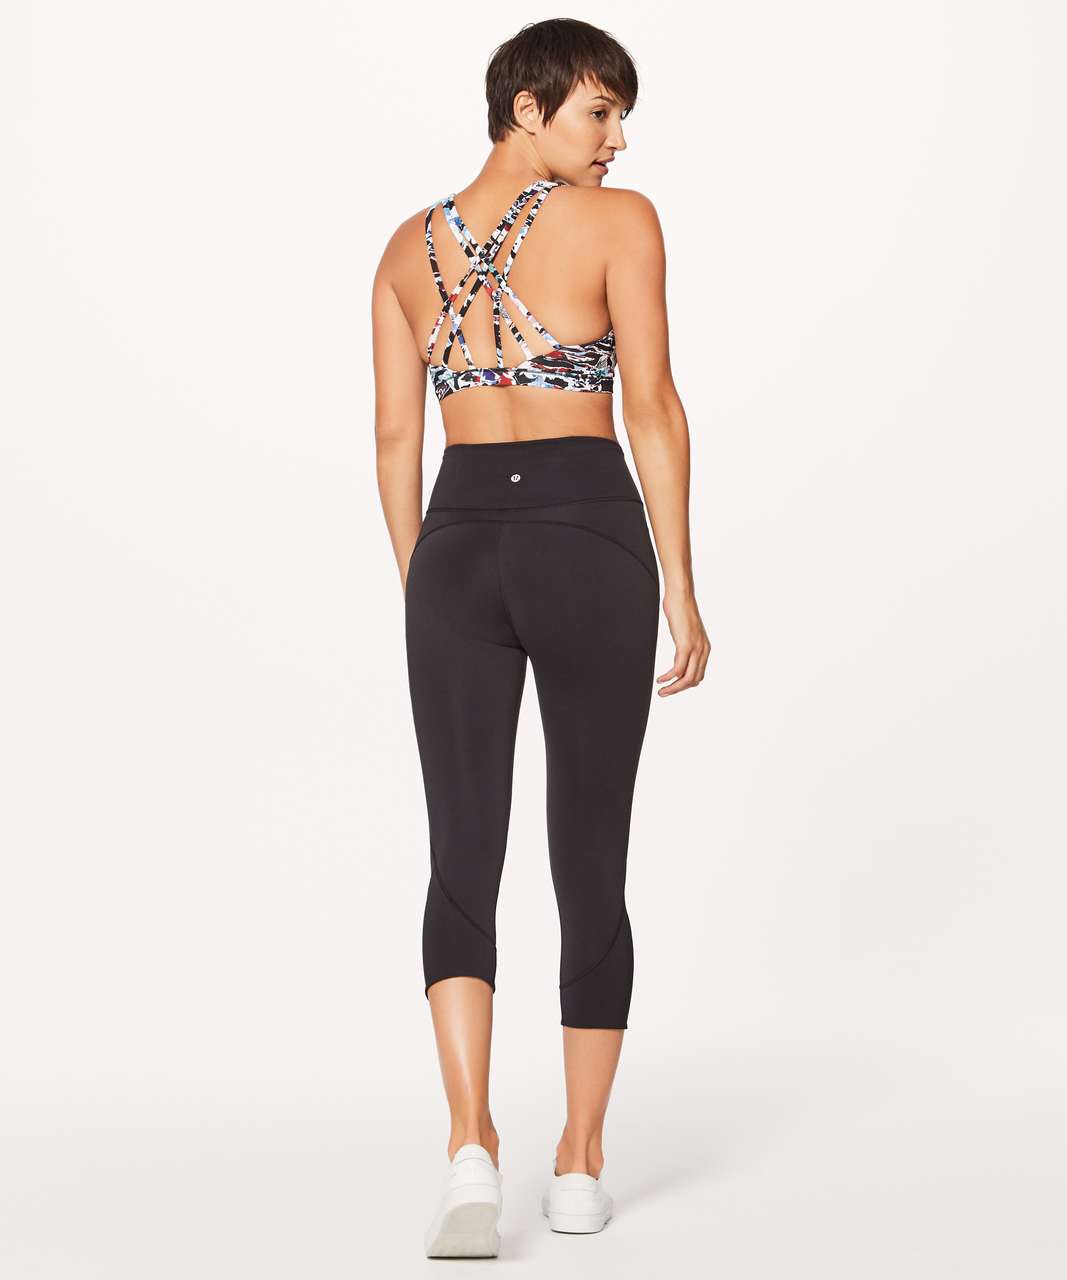 Lululemon In Movement Crop *Everlux 19" - Black (First Release)